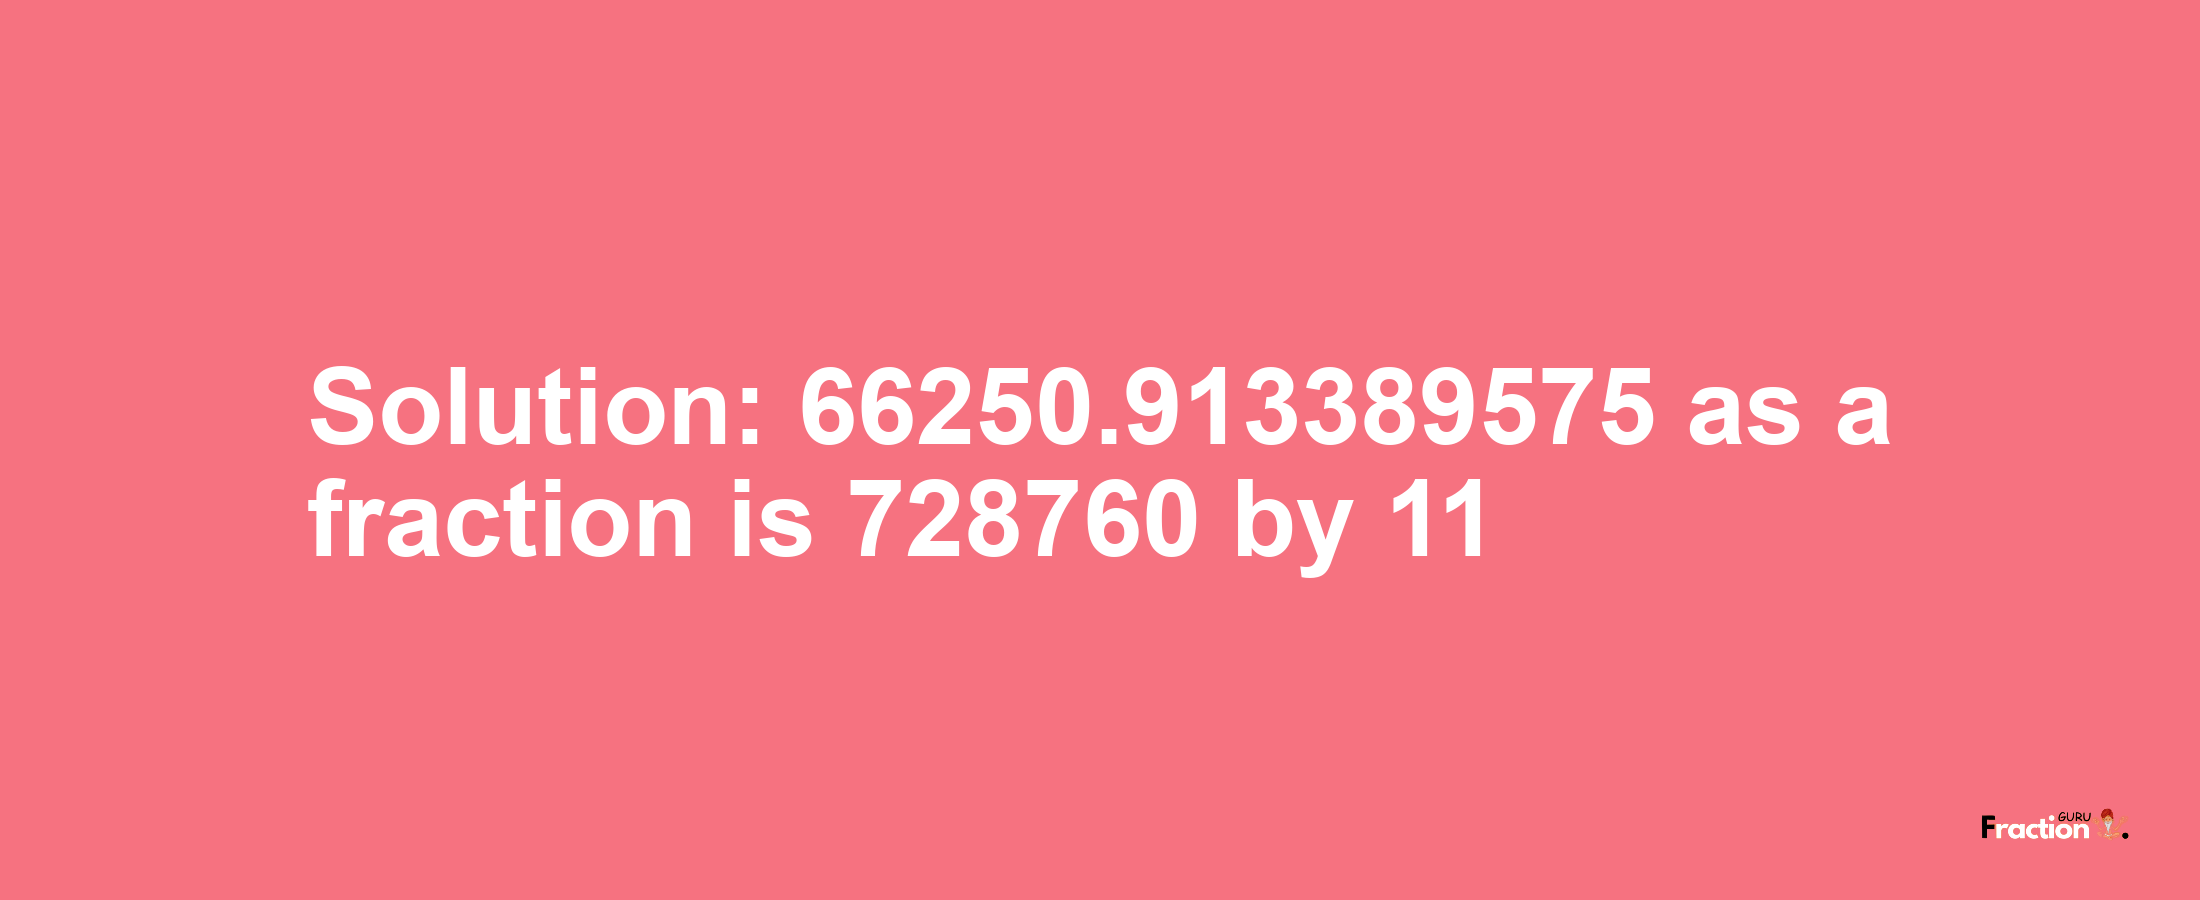 Solution:66250.913389575 as a fraction is 728760/11